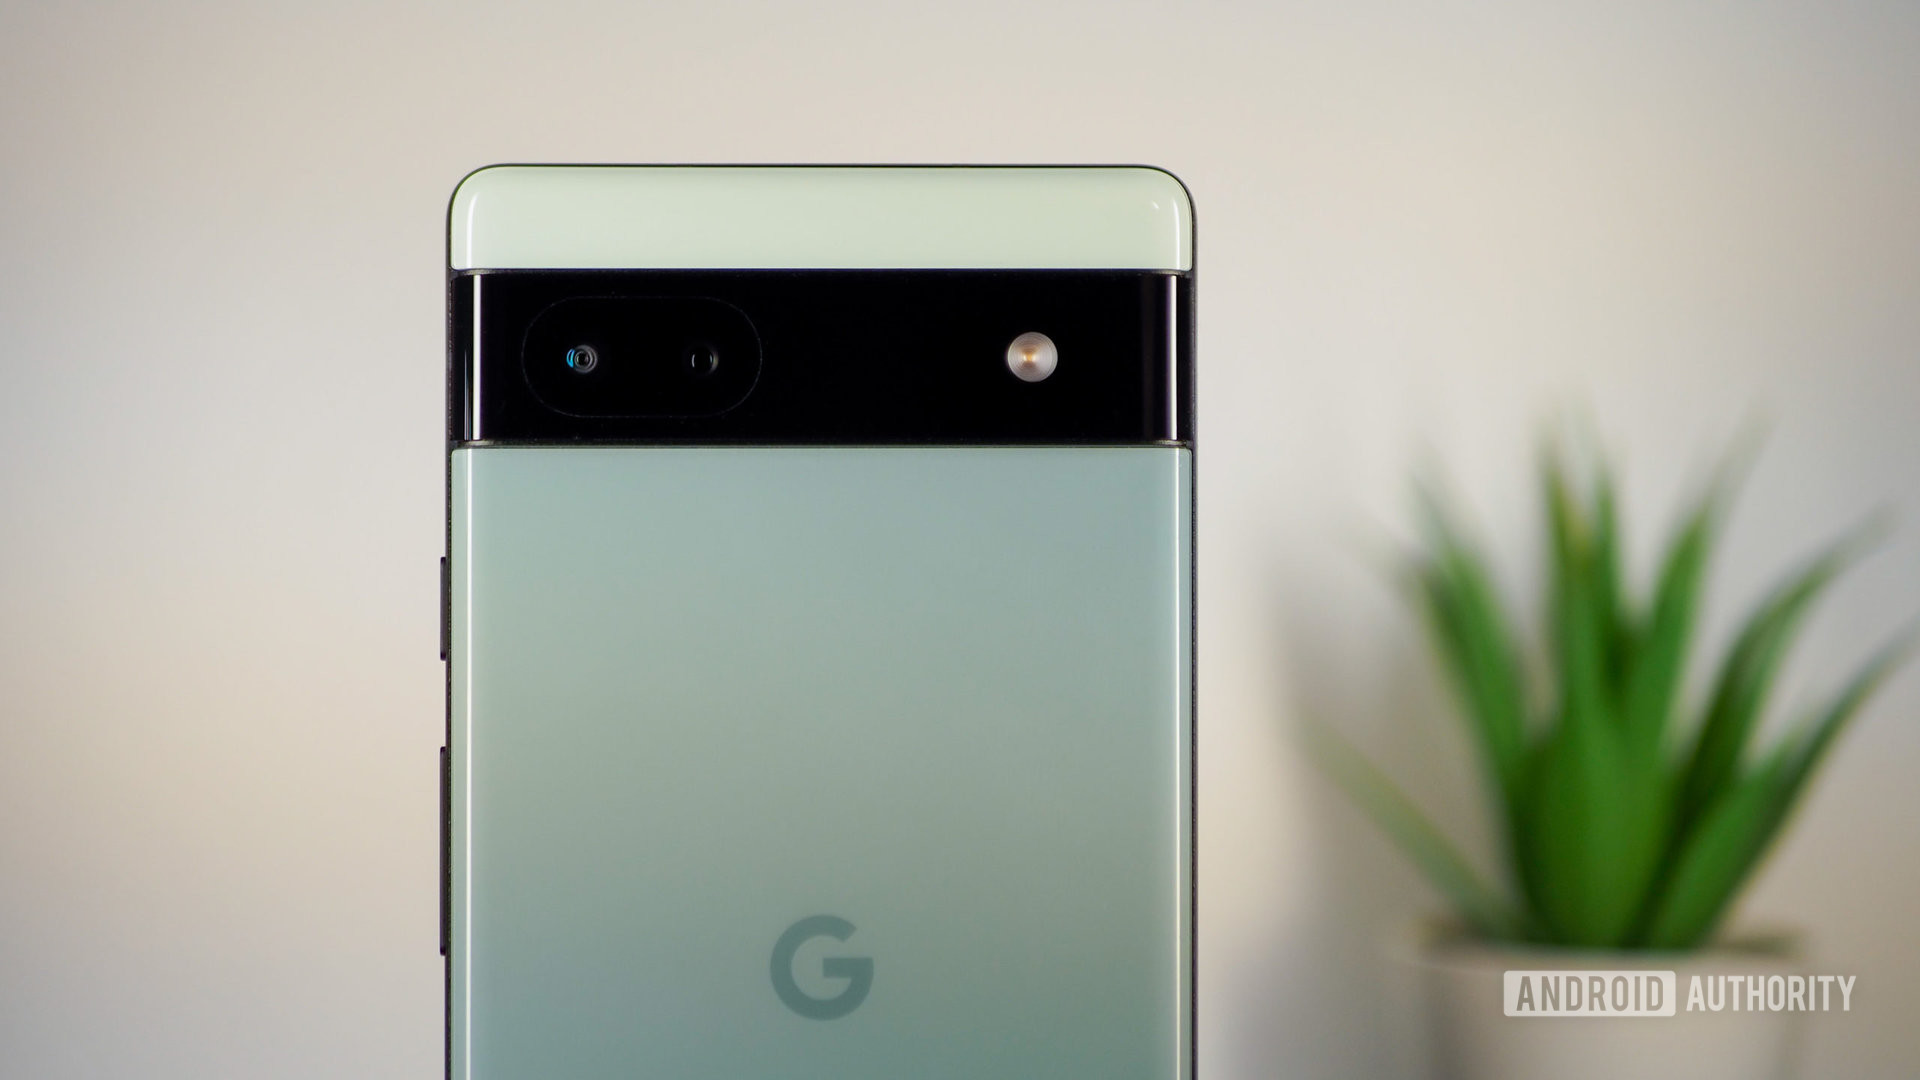 Google Pixel 6a in Sage color, seen from the back, focus on the camera bump